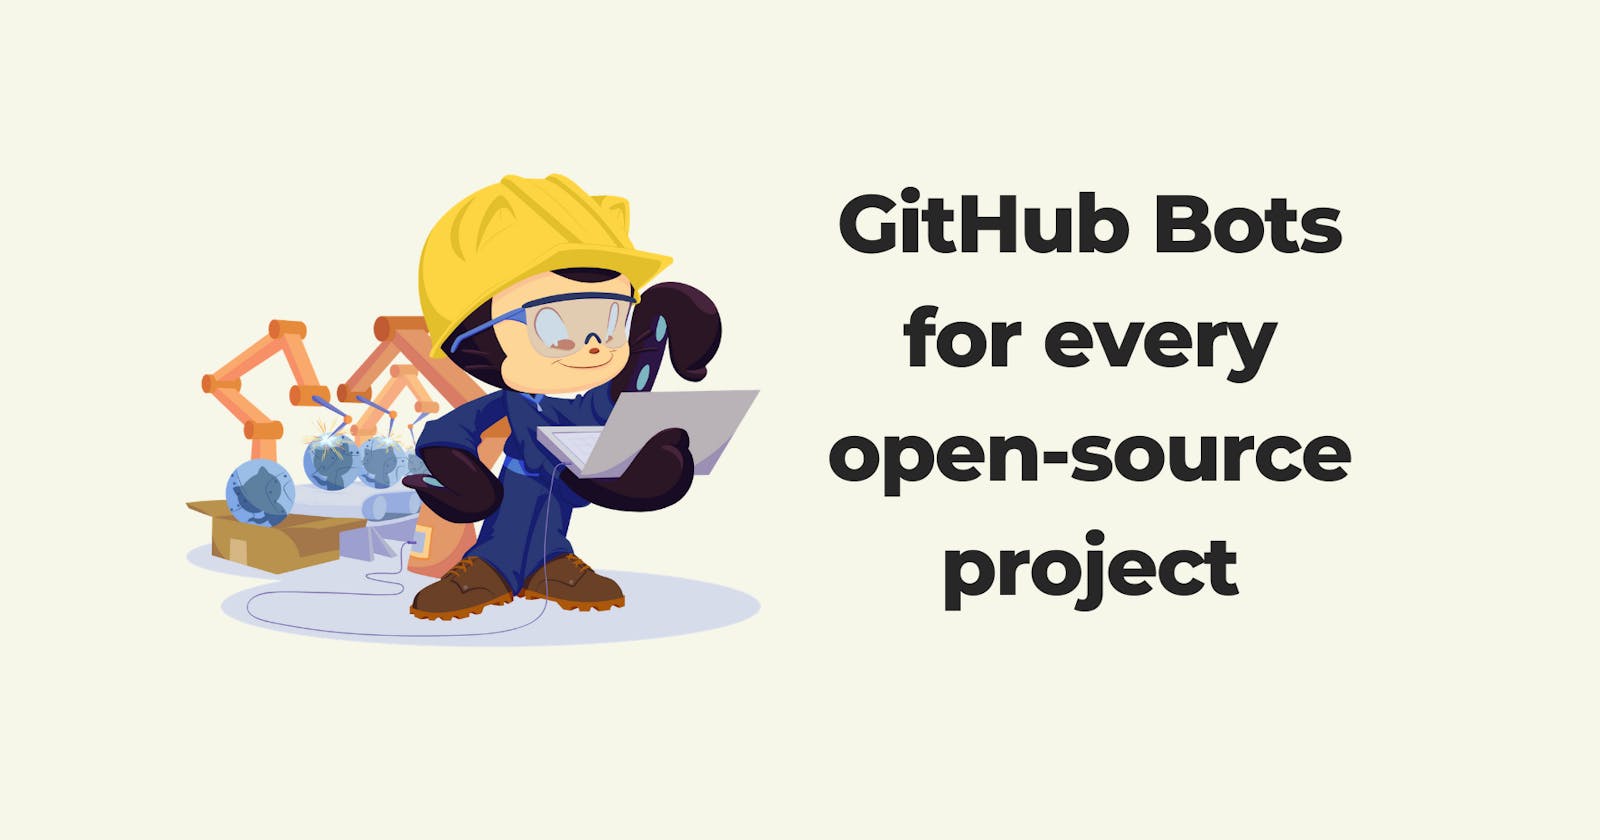 GitHub Bots for every open-source project